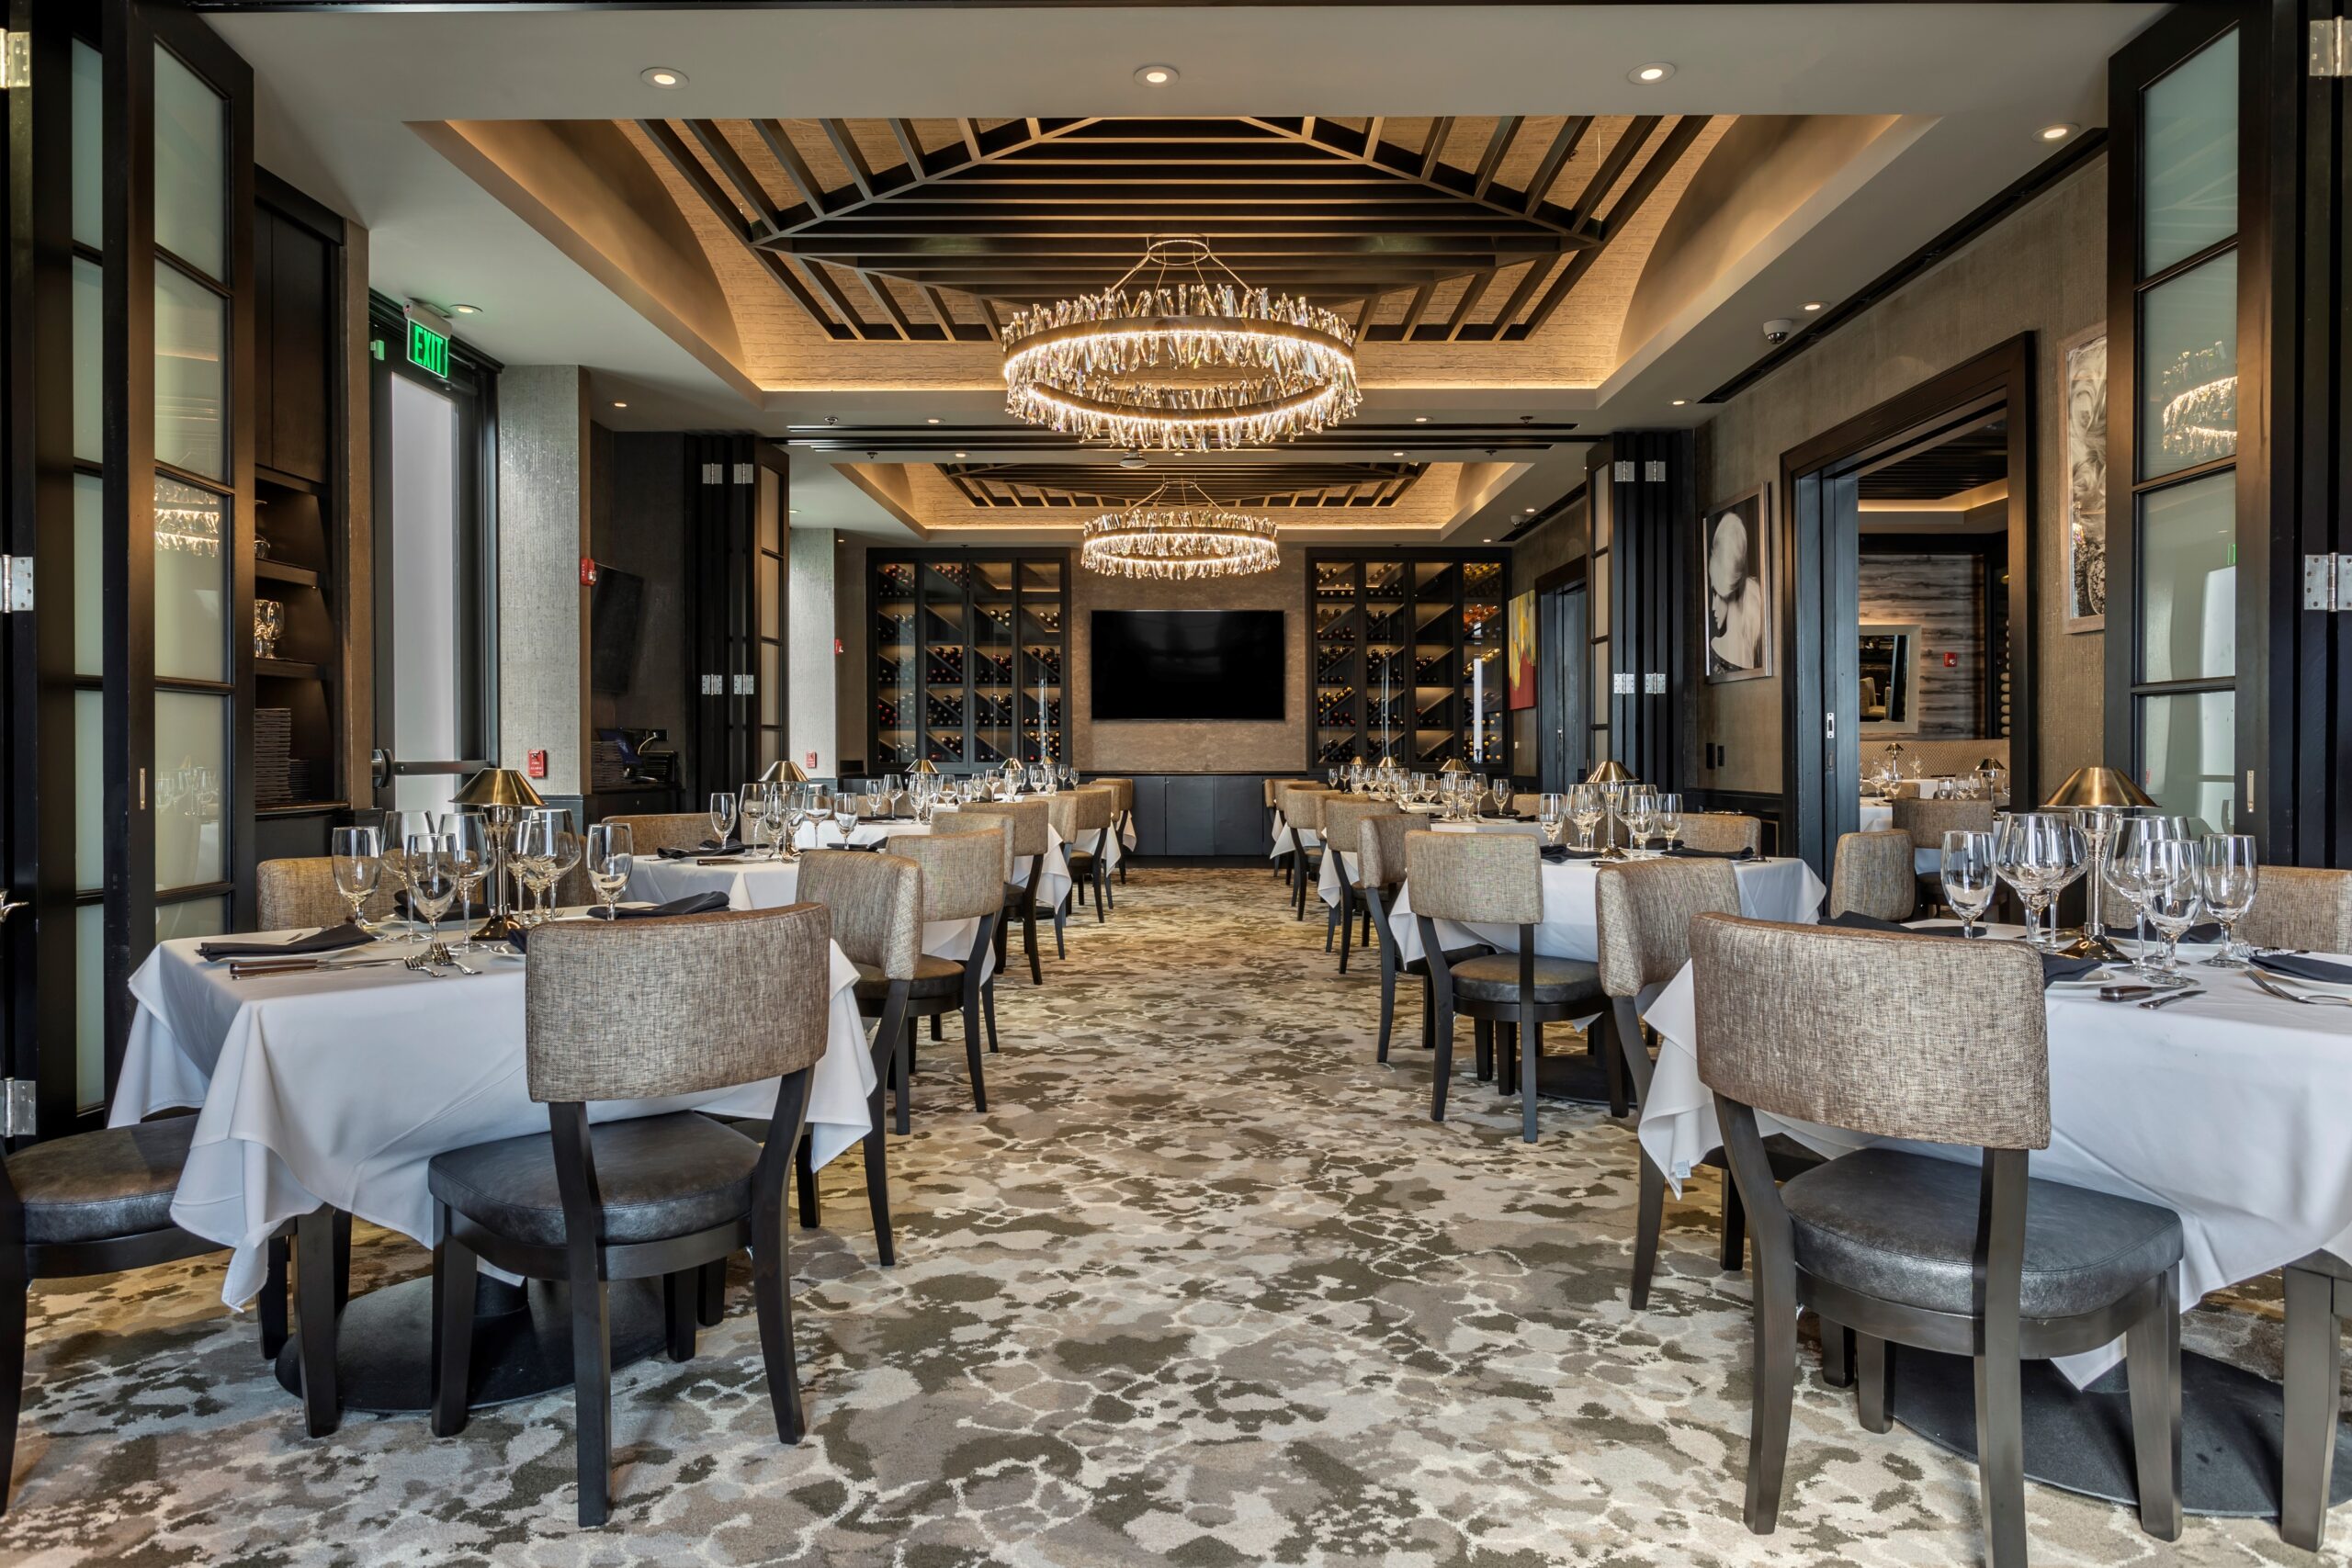 The Larson Financial Group invites you to the Mastro's Ocean Club for an exclusive dinner event.